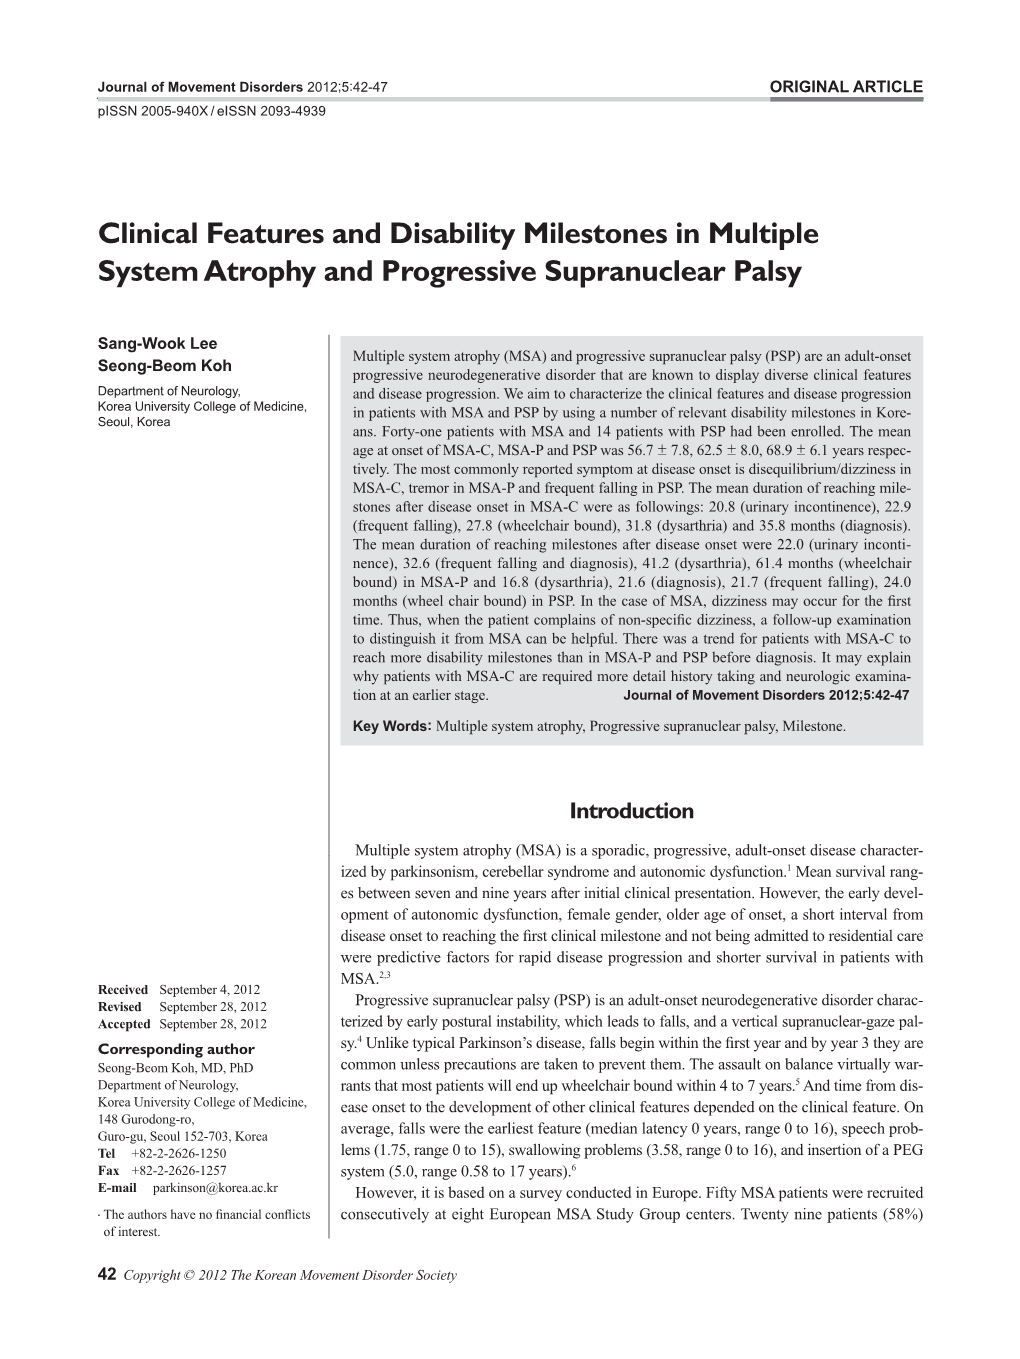 Clinical Features and Disability Milestones in Multiple System Atrophy and Progressive Supranuclear Palsy